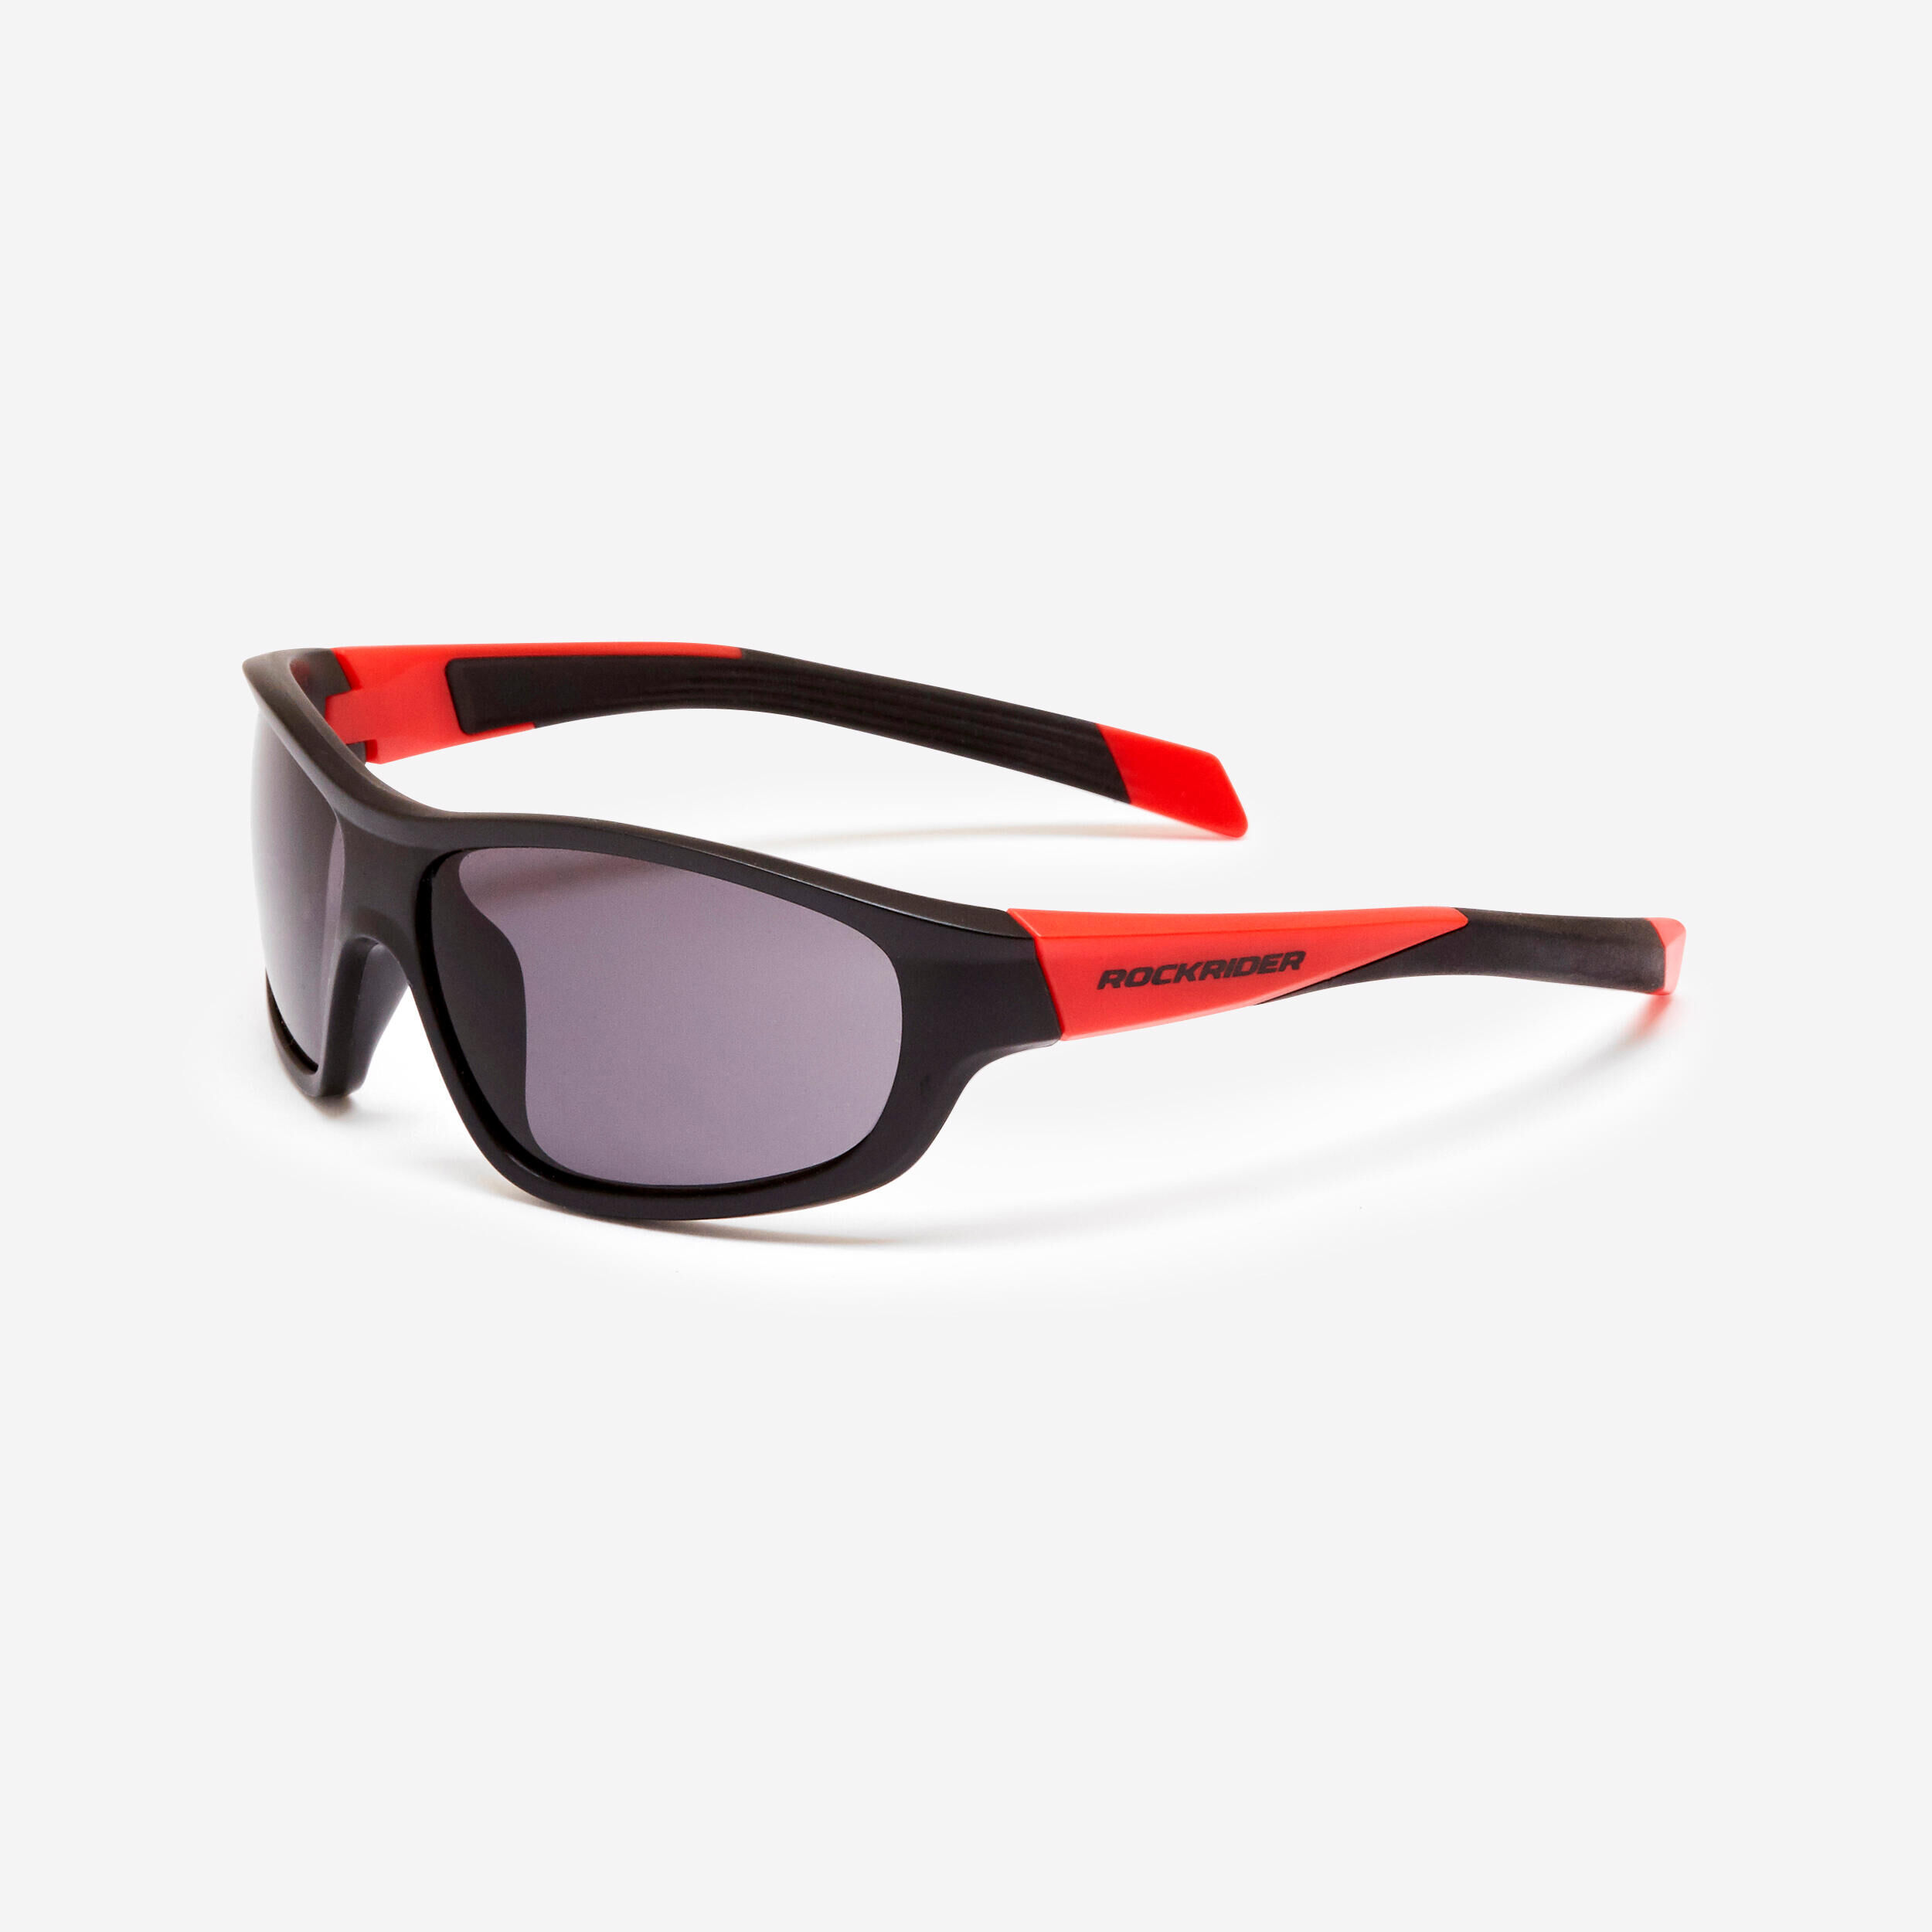 BTWIN Kids' Cat 3 Cycling Sunglasses- Black/Red